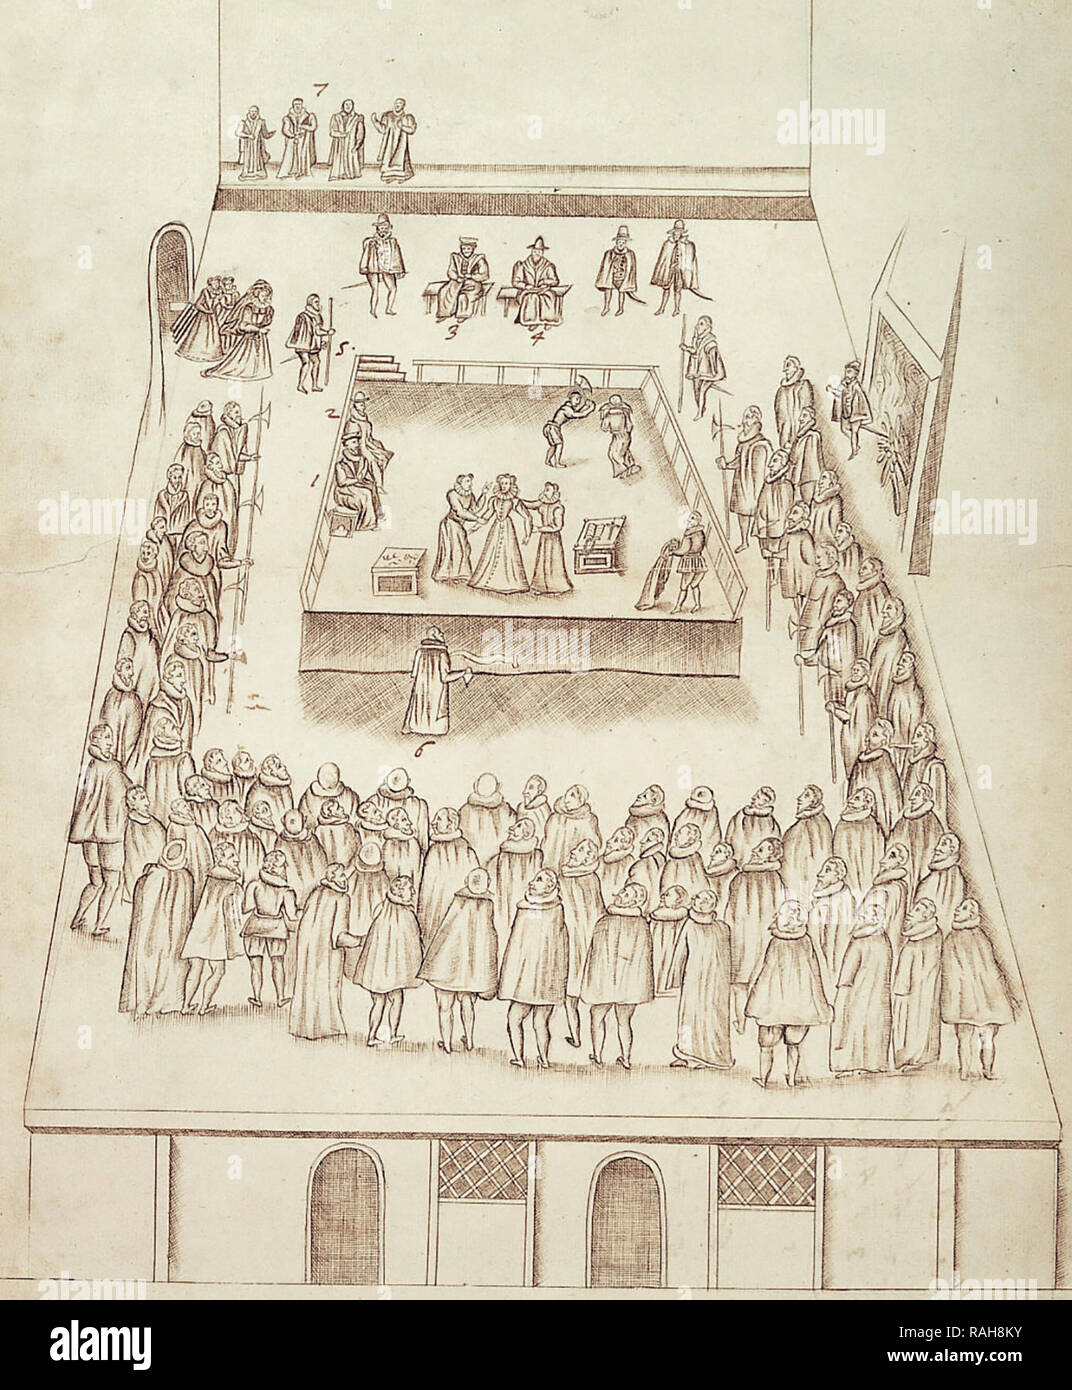 The execution of Mary Queen of Scots at Fotheringhay Castle on 8 February 1587, drawn by Robert Beale (1541-1601),Clerk of the Privy Council to Queen Elizabeth I, who wrote the official record of the execution of Mary, Queen of Scots, to which he was an eyewitness. The evening before the exection he had read-out to Mary, Queen of Scots her death warrant and informed her that she was to be executed the following morning. Key to numbers: George Talbot, 6th Earl of Shrewsbury and Henry Grey, 6th Earl of Kent are seated to the left (1 & 2) and Sir Amias Paulet Stock Photo